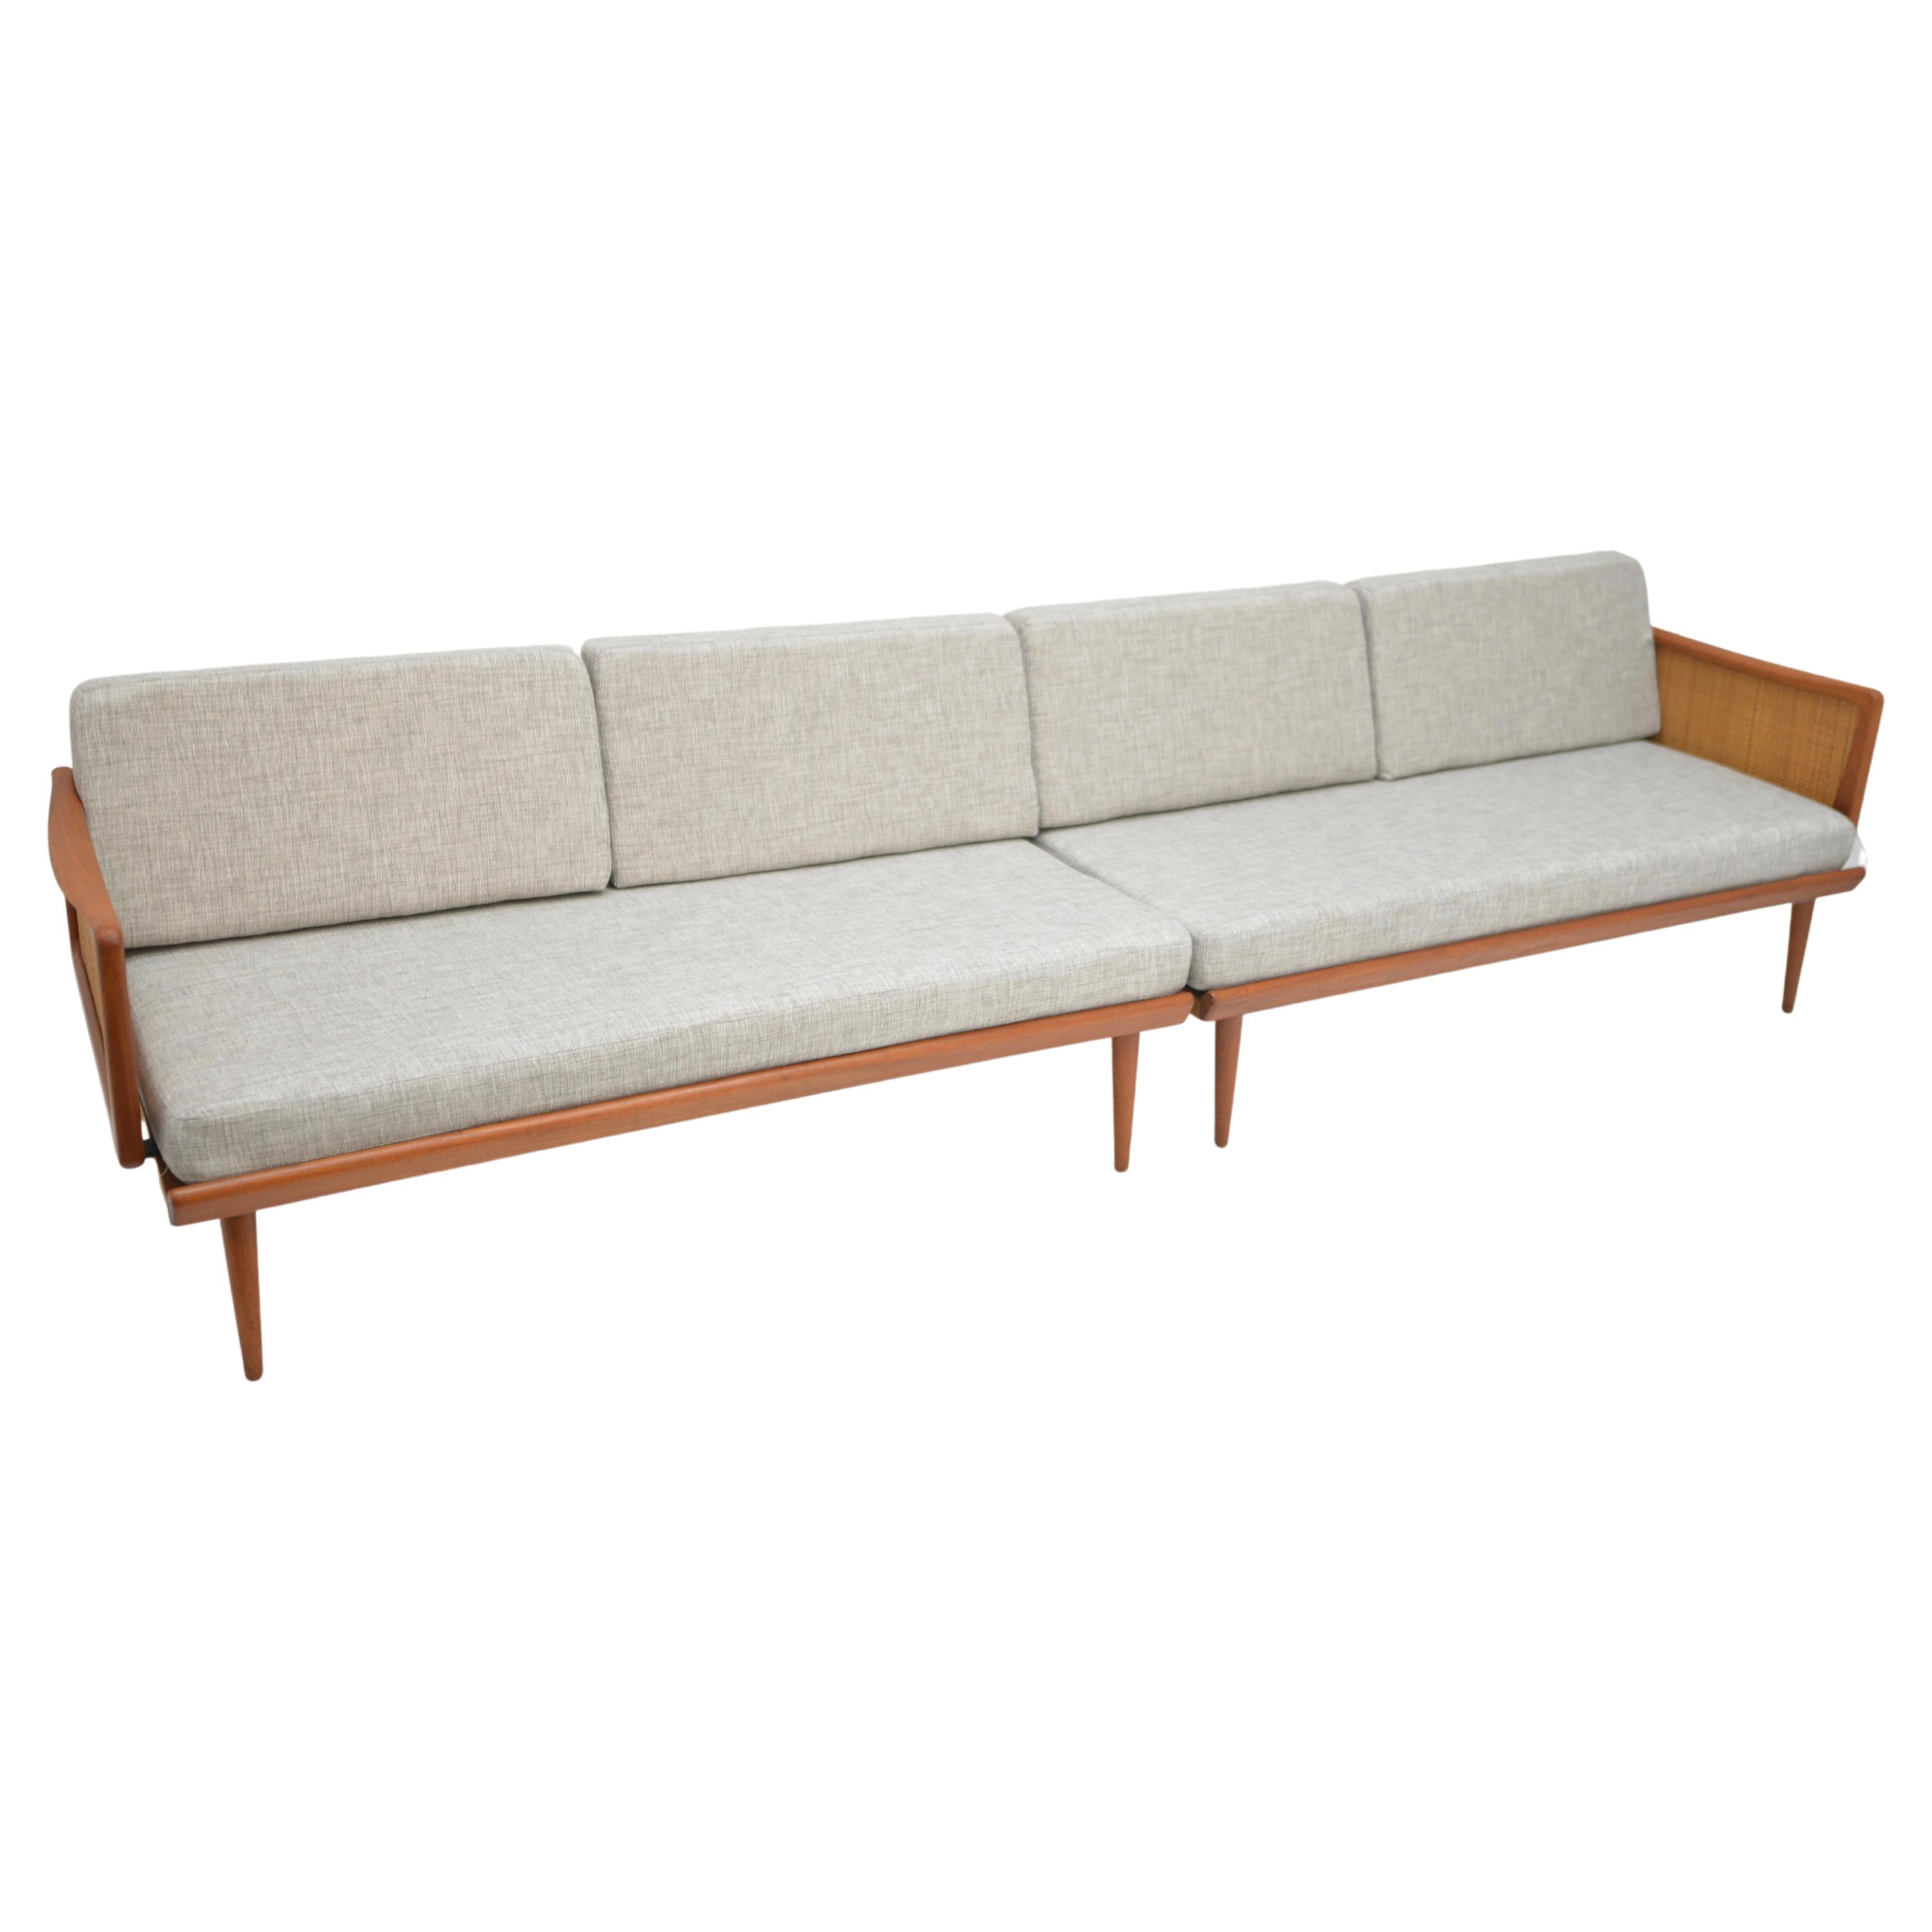 This multifunctional living room set can sleep two and provide all the seating you need. Both daybeds feature new upholstery and cushions, solid teak frames, and the arms have inset caned side panels that fold down to provide a longer resting space